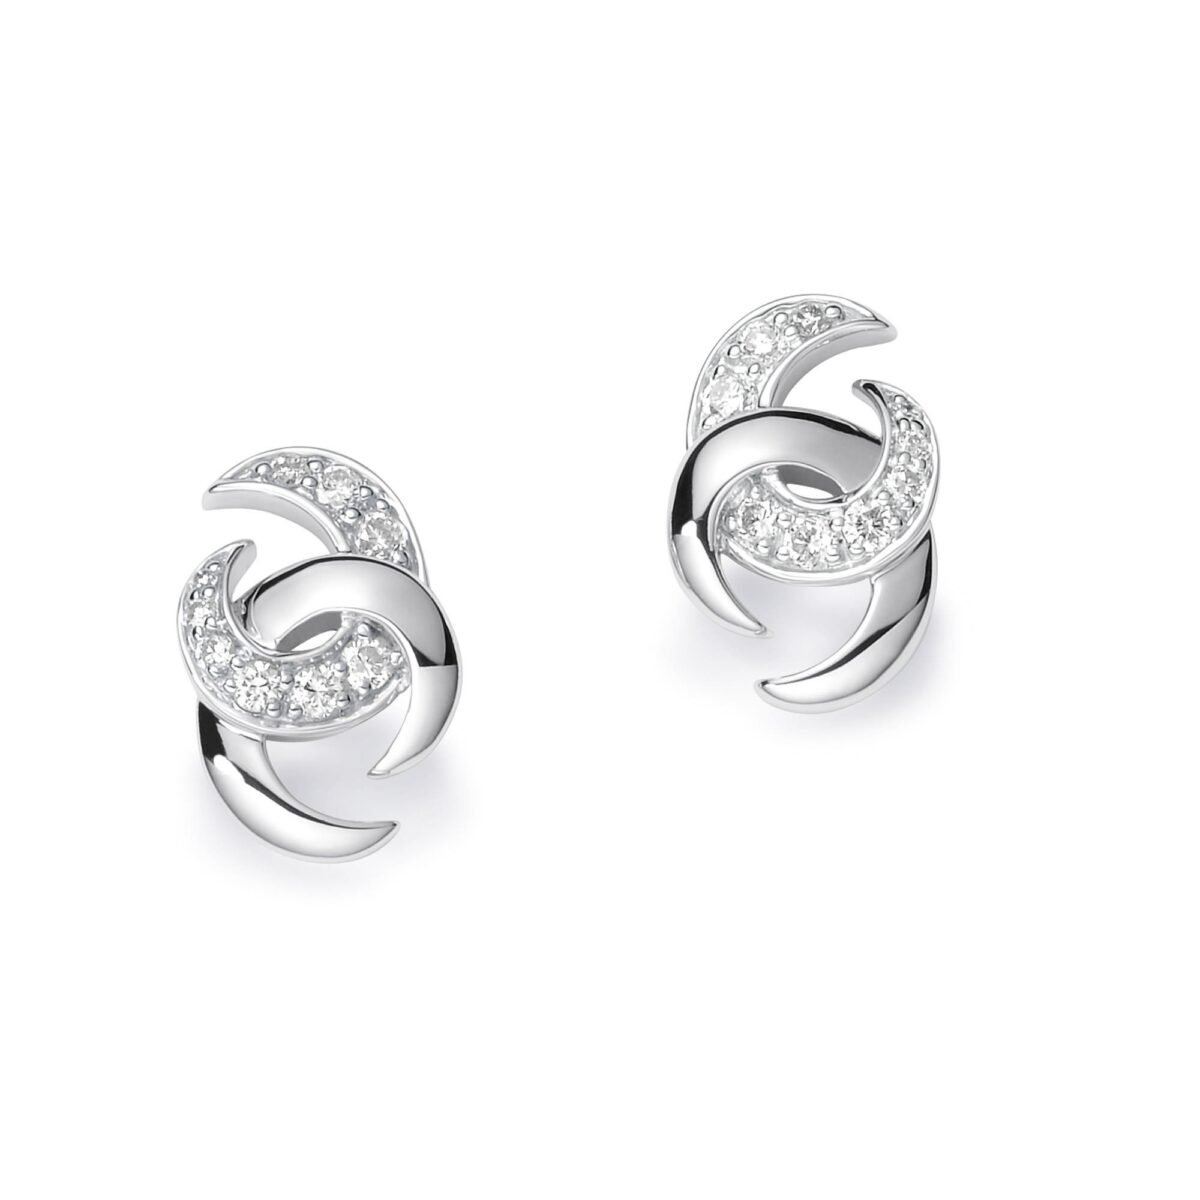 Hooked on You White Gold Diamond Earrings